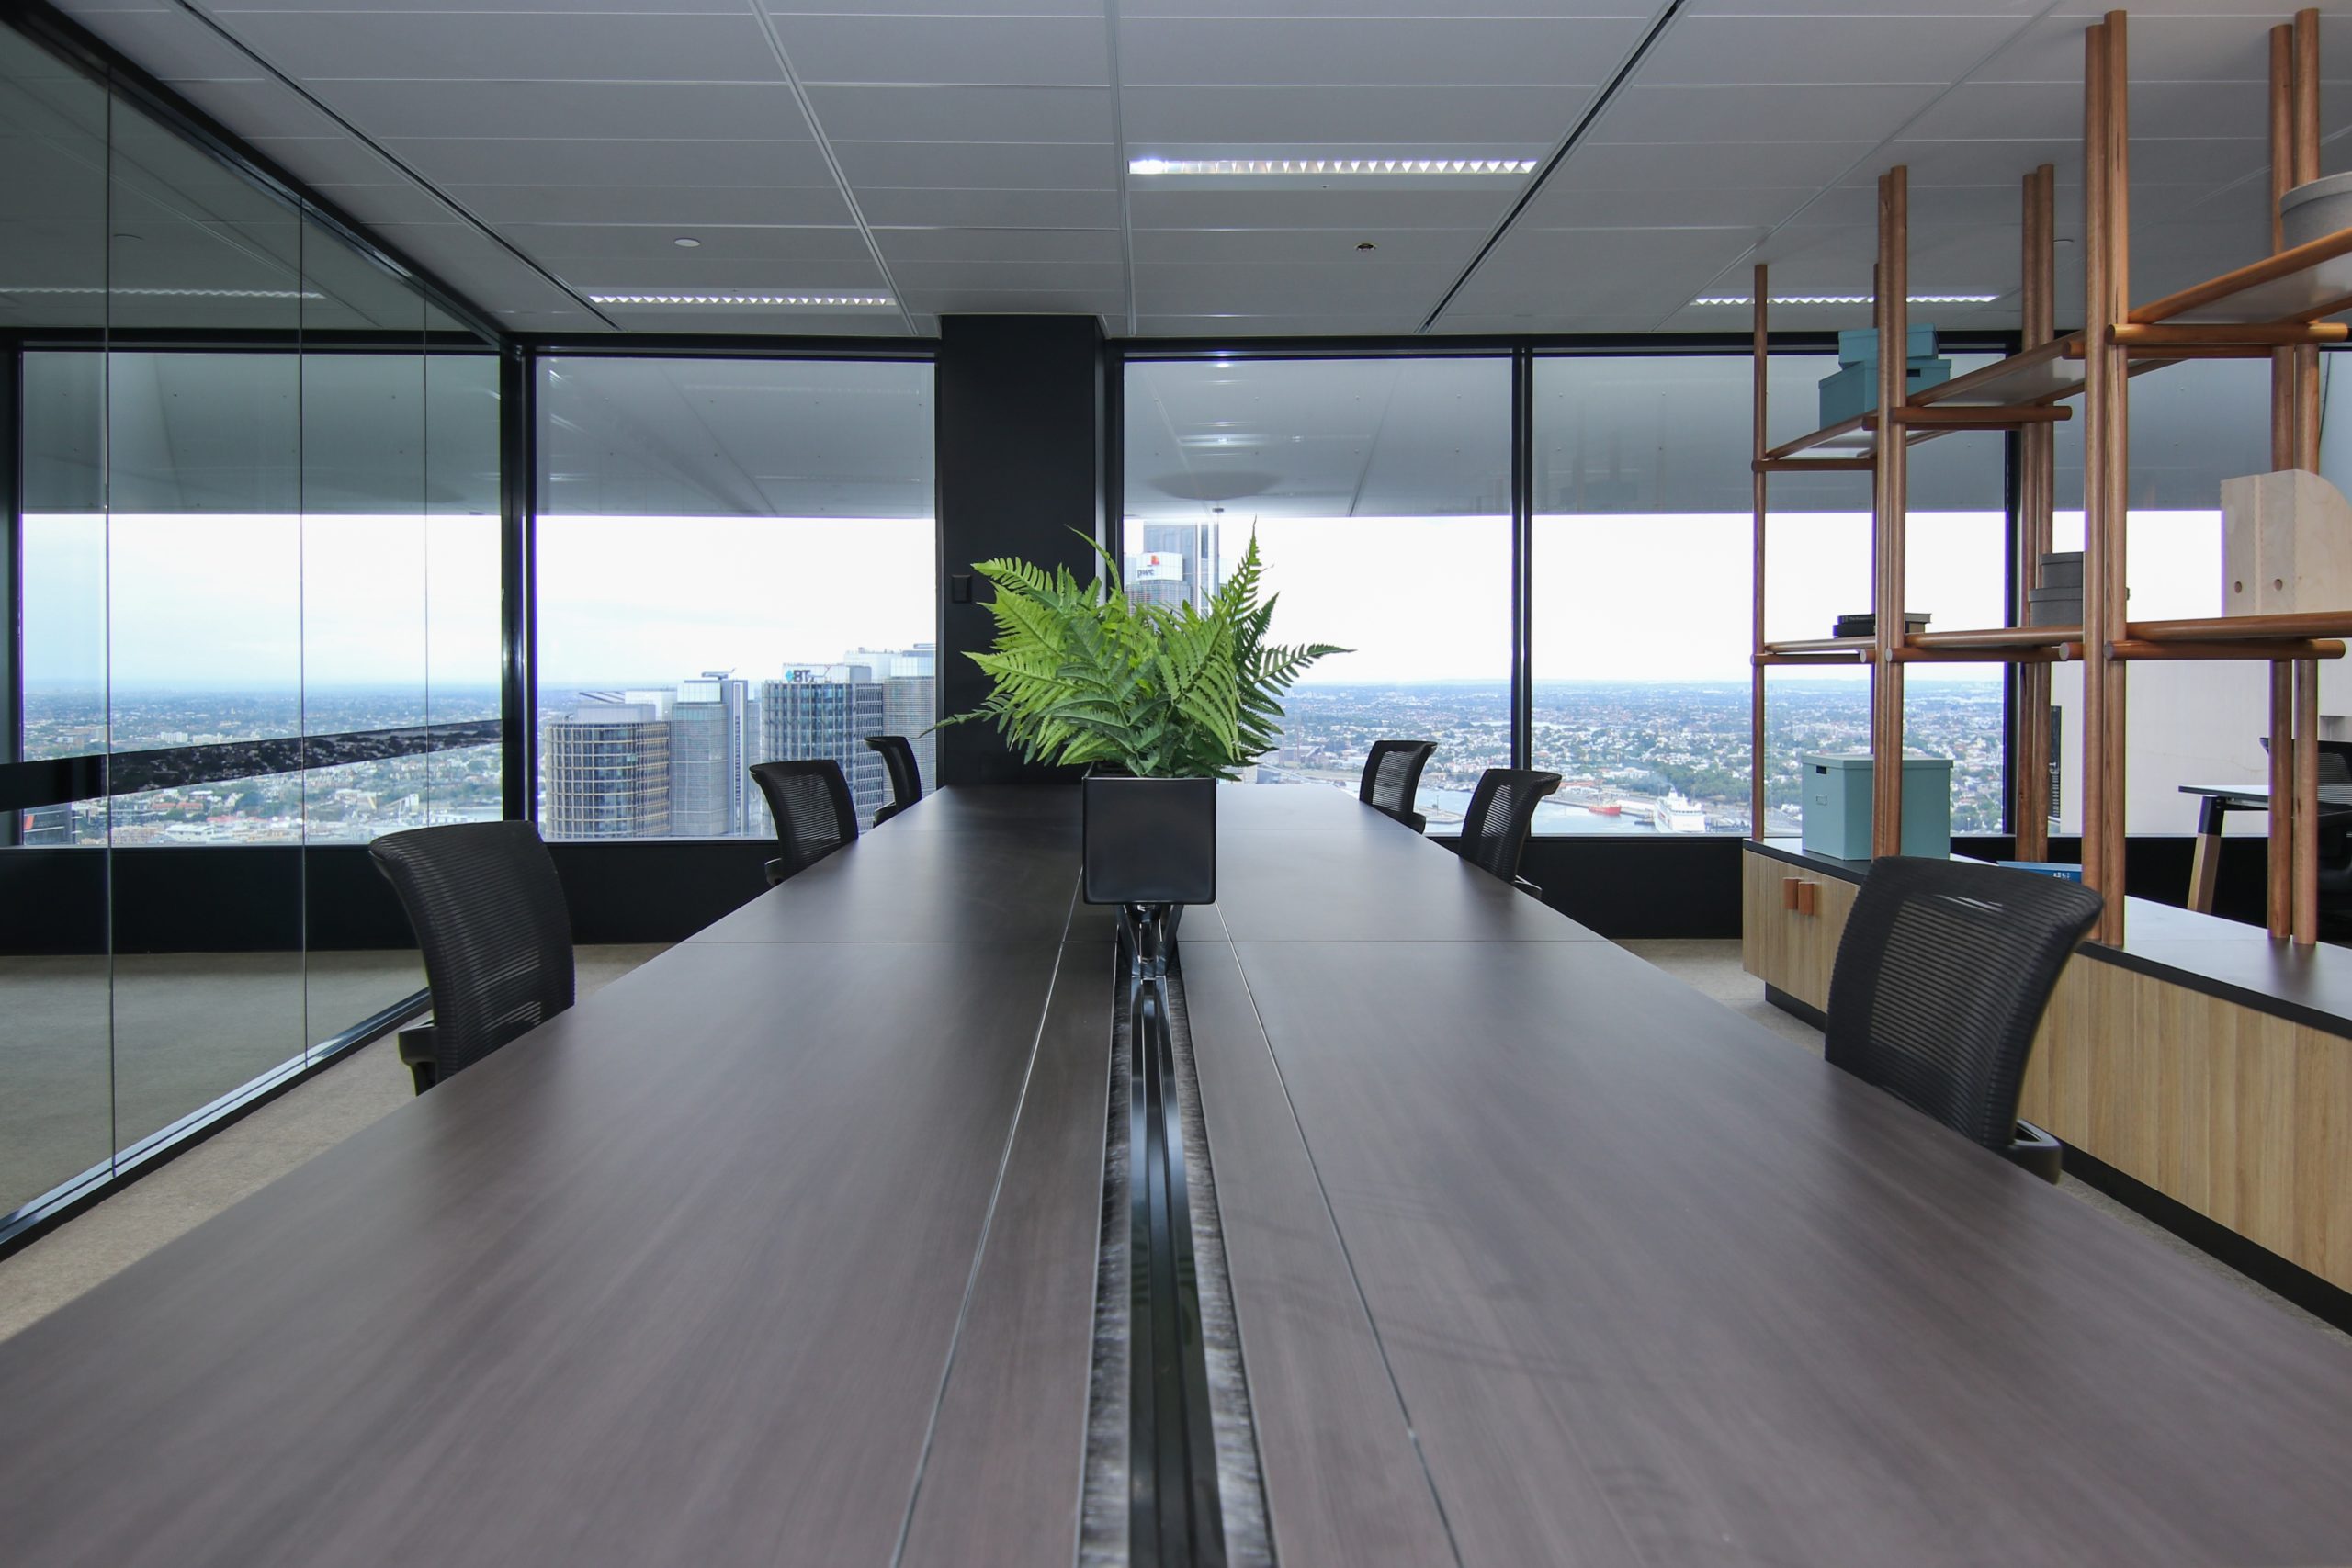 window-leather-chairs-board-dark-work-public-hall-architecture-background-boardroom-bright-business_t20_kzvxm3